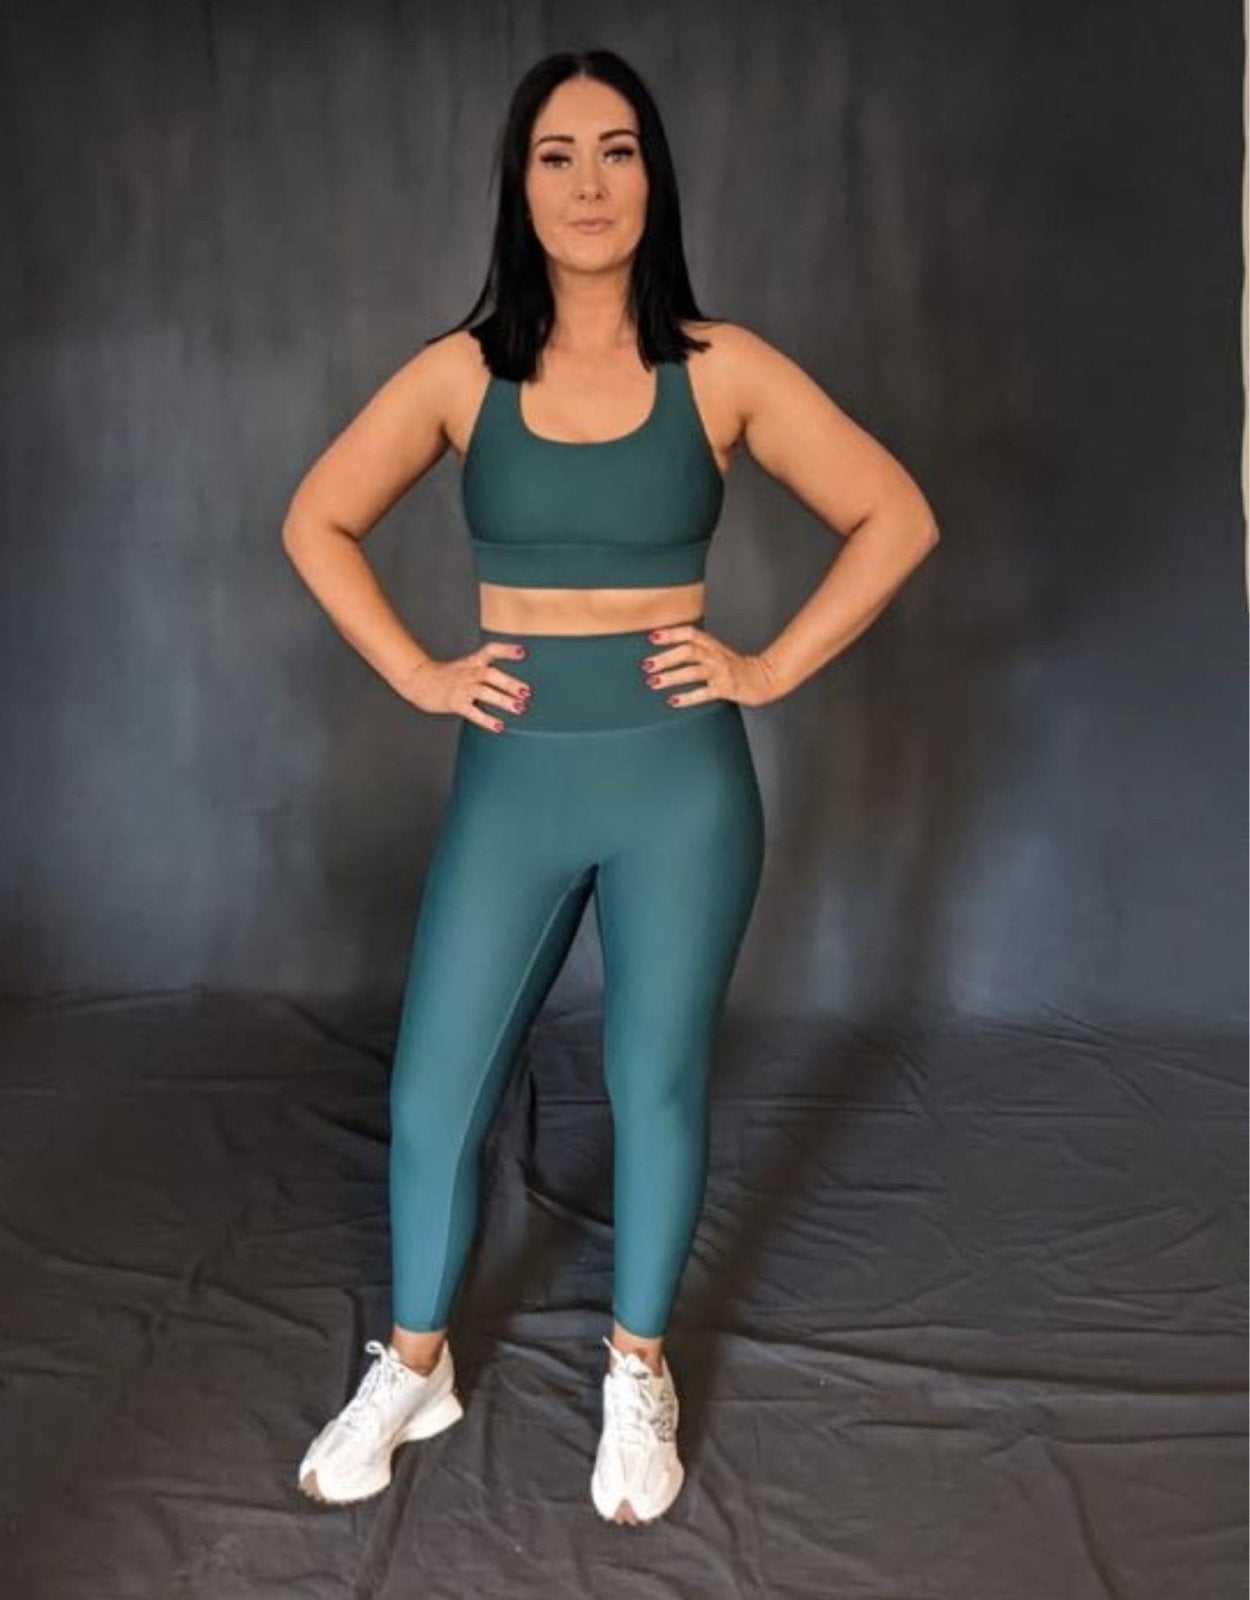 girl standing with hands on her hips. she is wearing green (evergreen) leggings and sports bra from vocus vit. Vocus vit is a sustainable women's activewear brand that uses recycled materials and ethical manufacturing. Based in Northern Ireland. Shipping worldwide.Sizes XS (8) TO XXL (18).